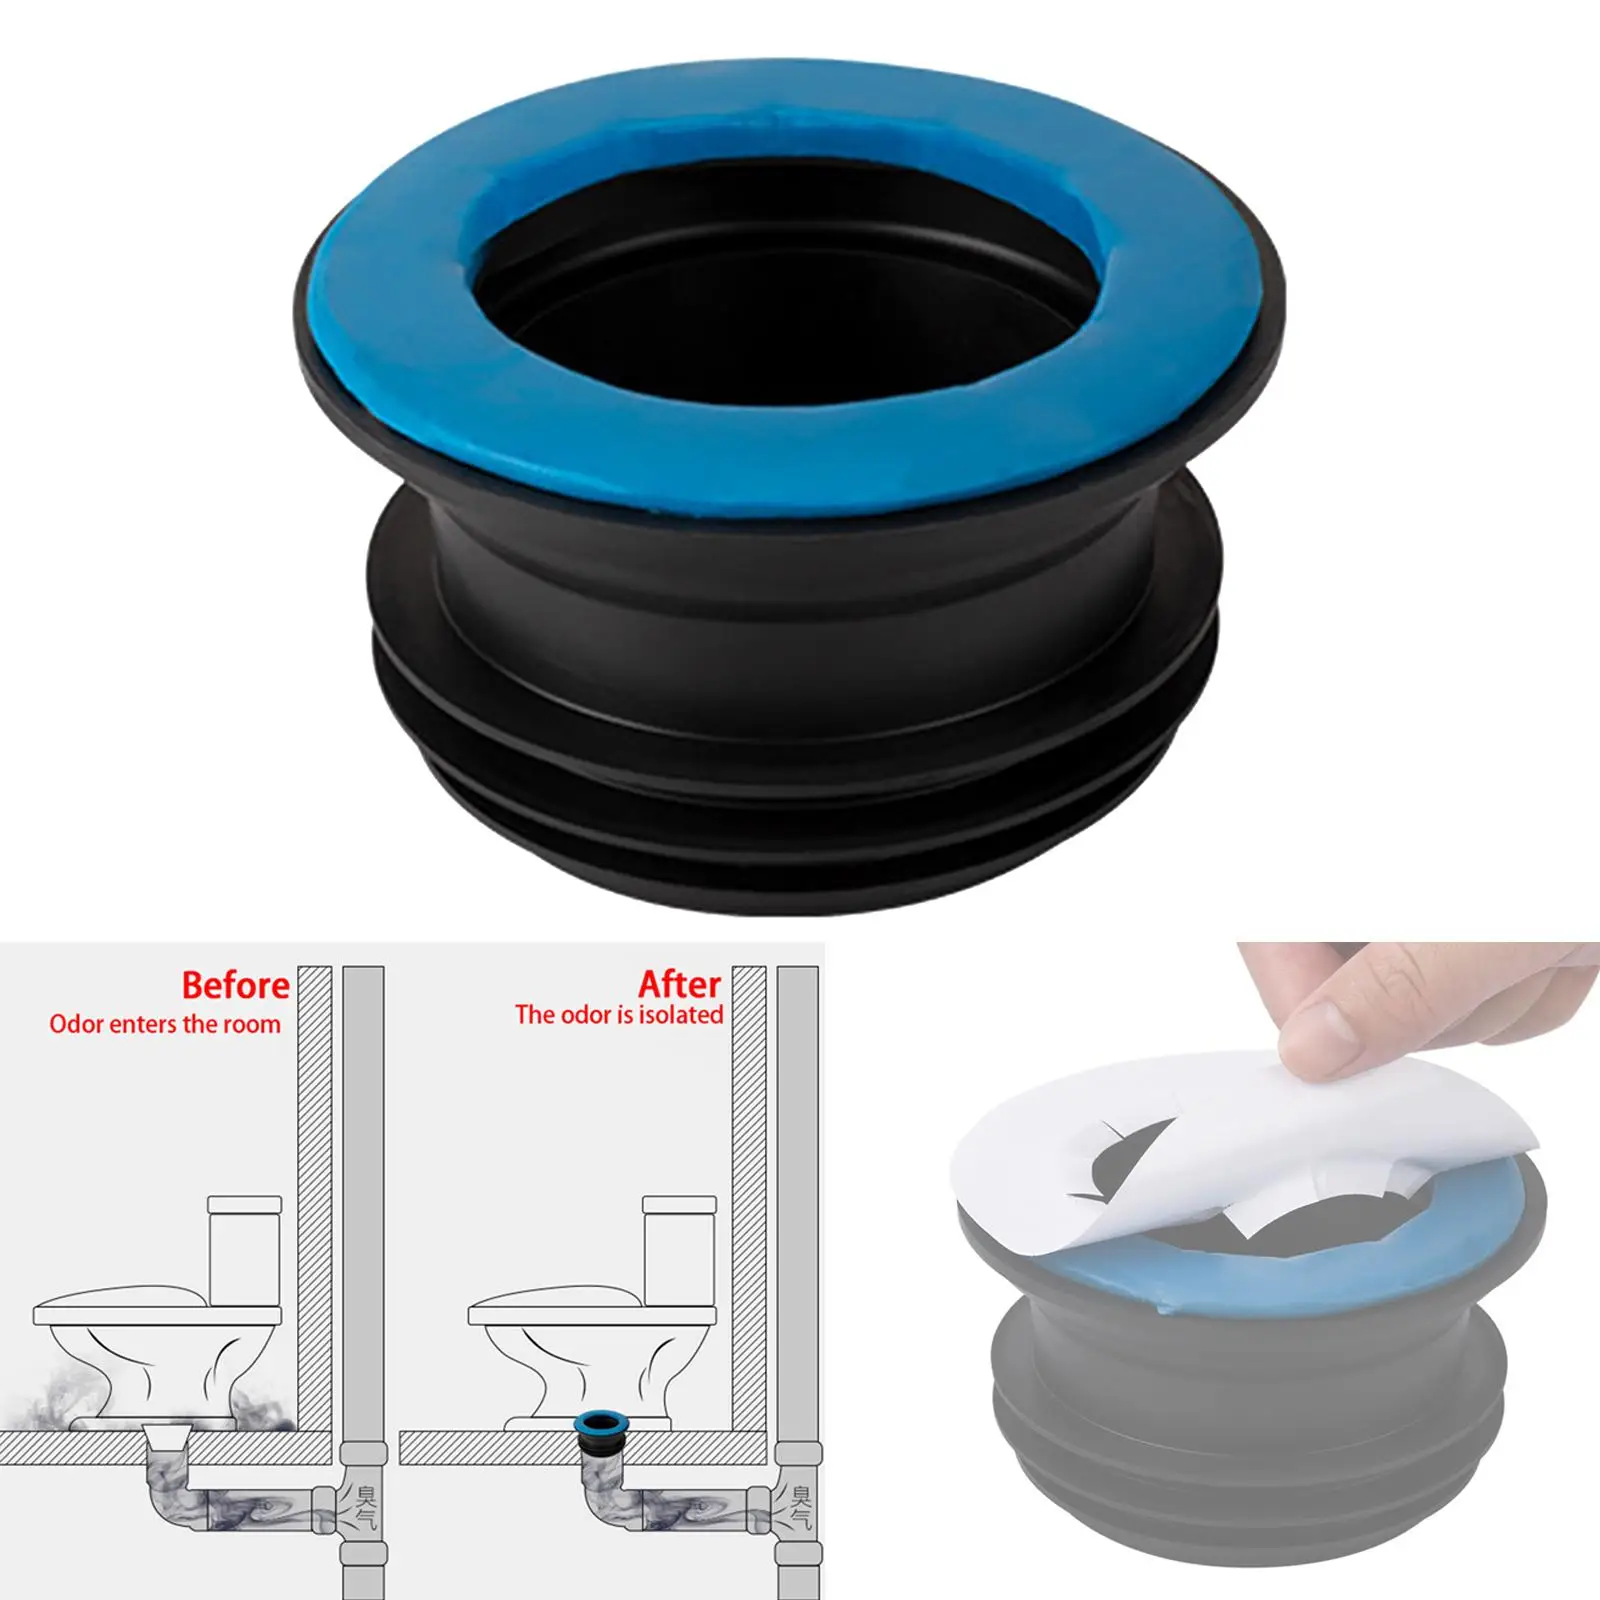 Durable Toilet Rubber Ring Toilet Seat Odor Resistant Replacement Seal Sealing Ring Bathroom Fitting Accessories Closestool Use